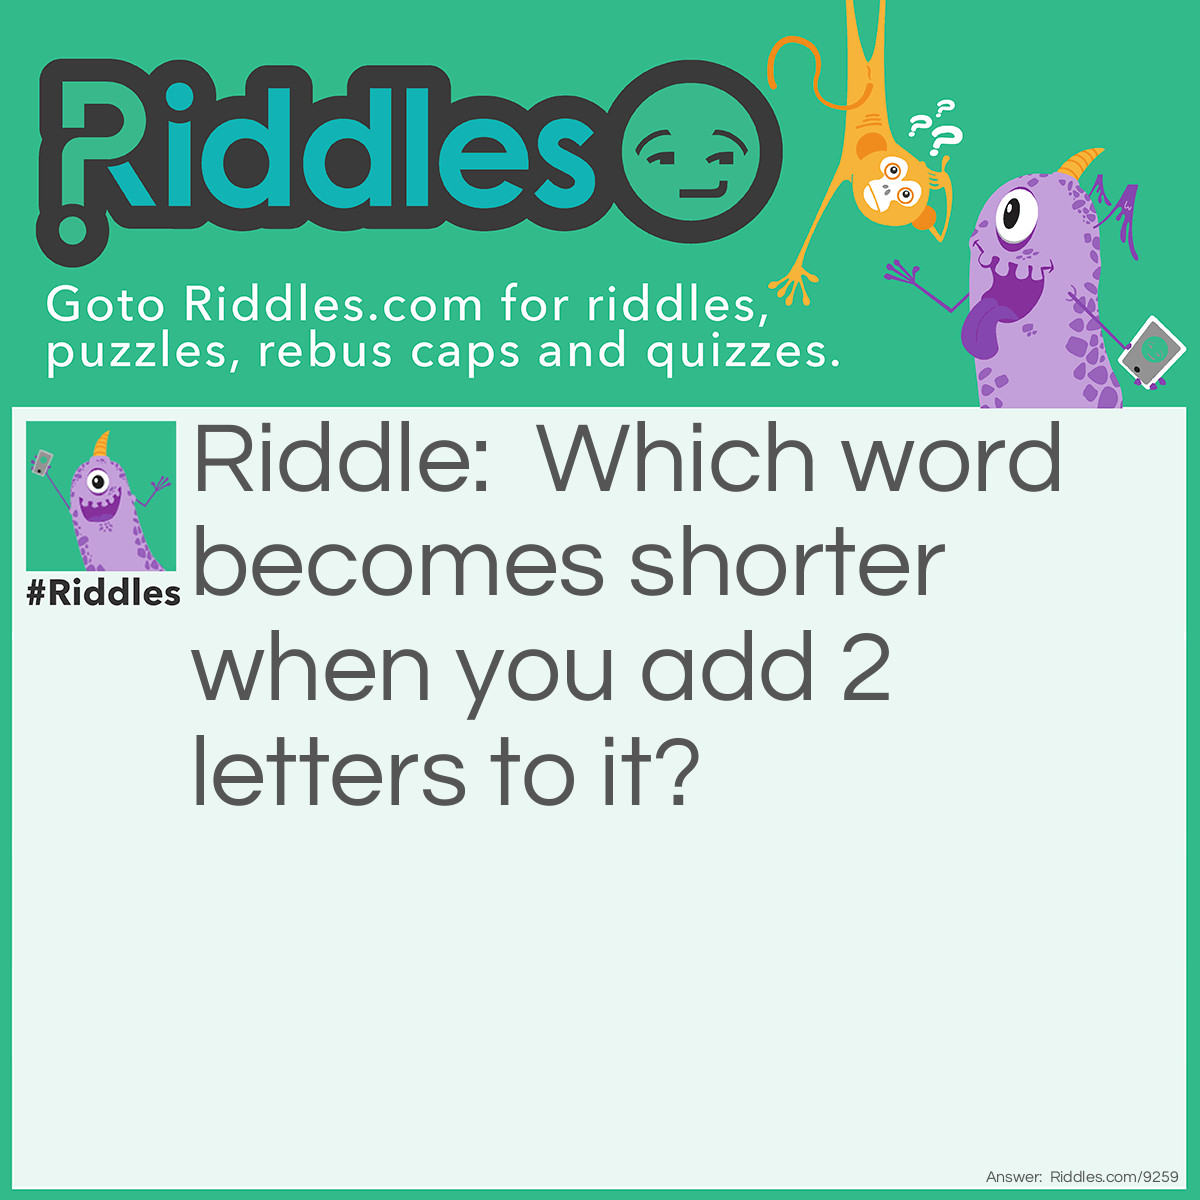 Riddle: Which word becomes shorter when you add 2 letters to it? Answer: The word “short.”